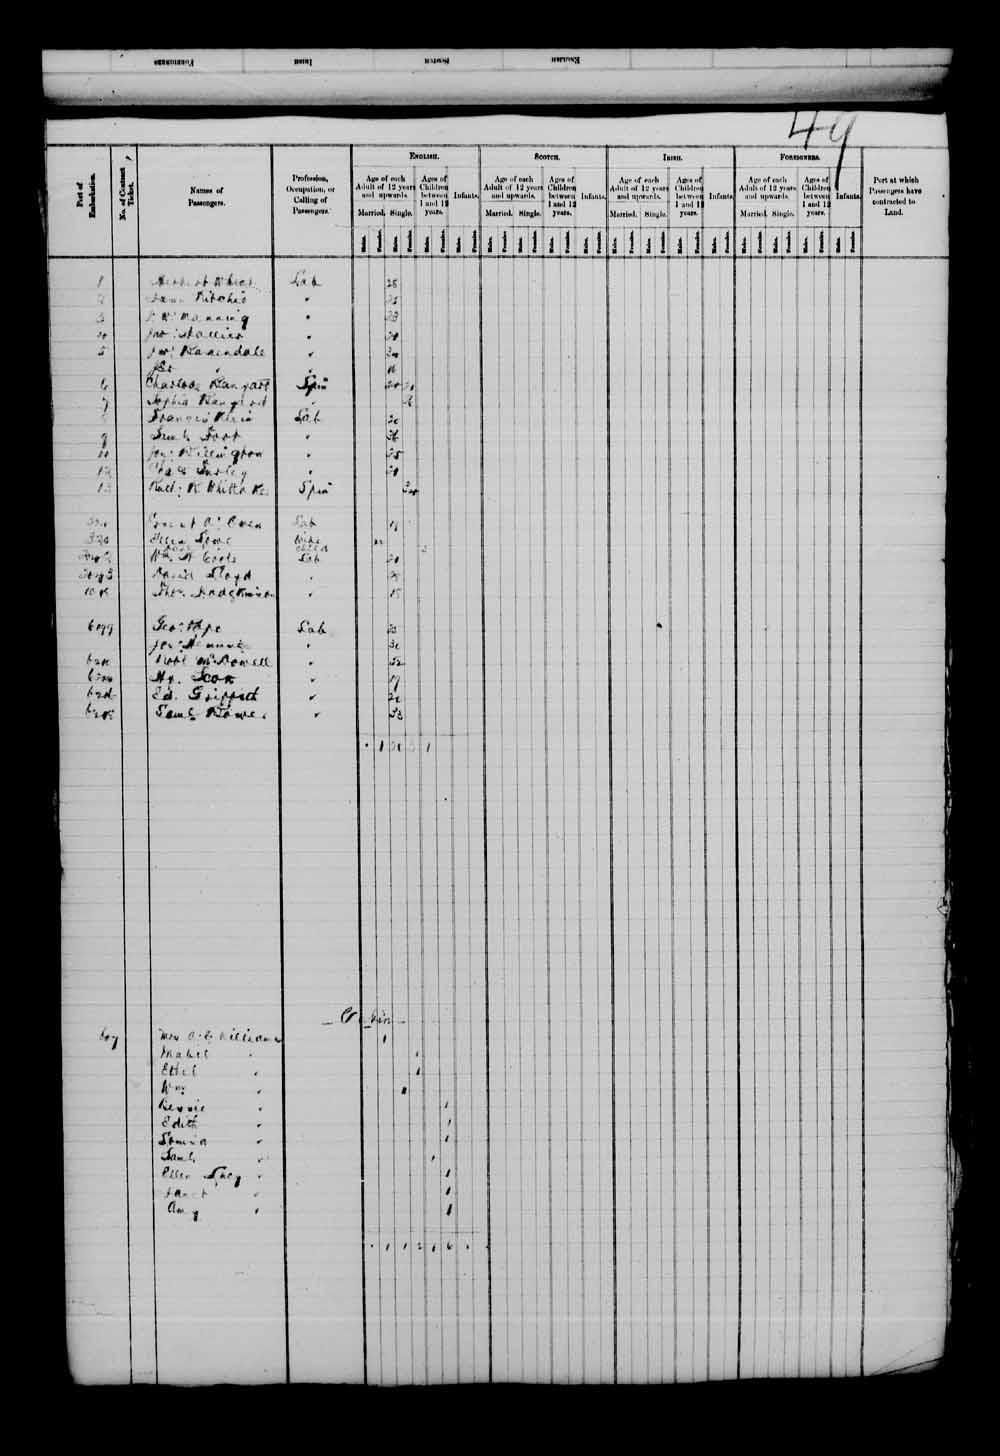 Digitized page of Passenger Lists for Image No.: e003543402